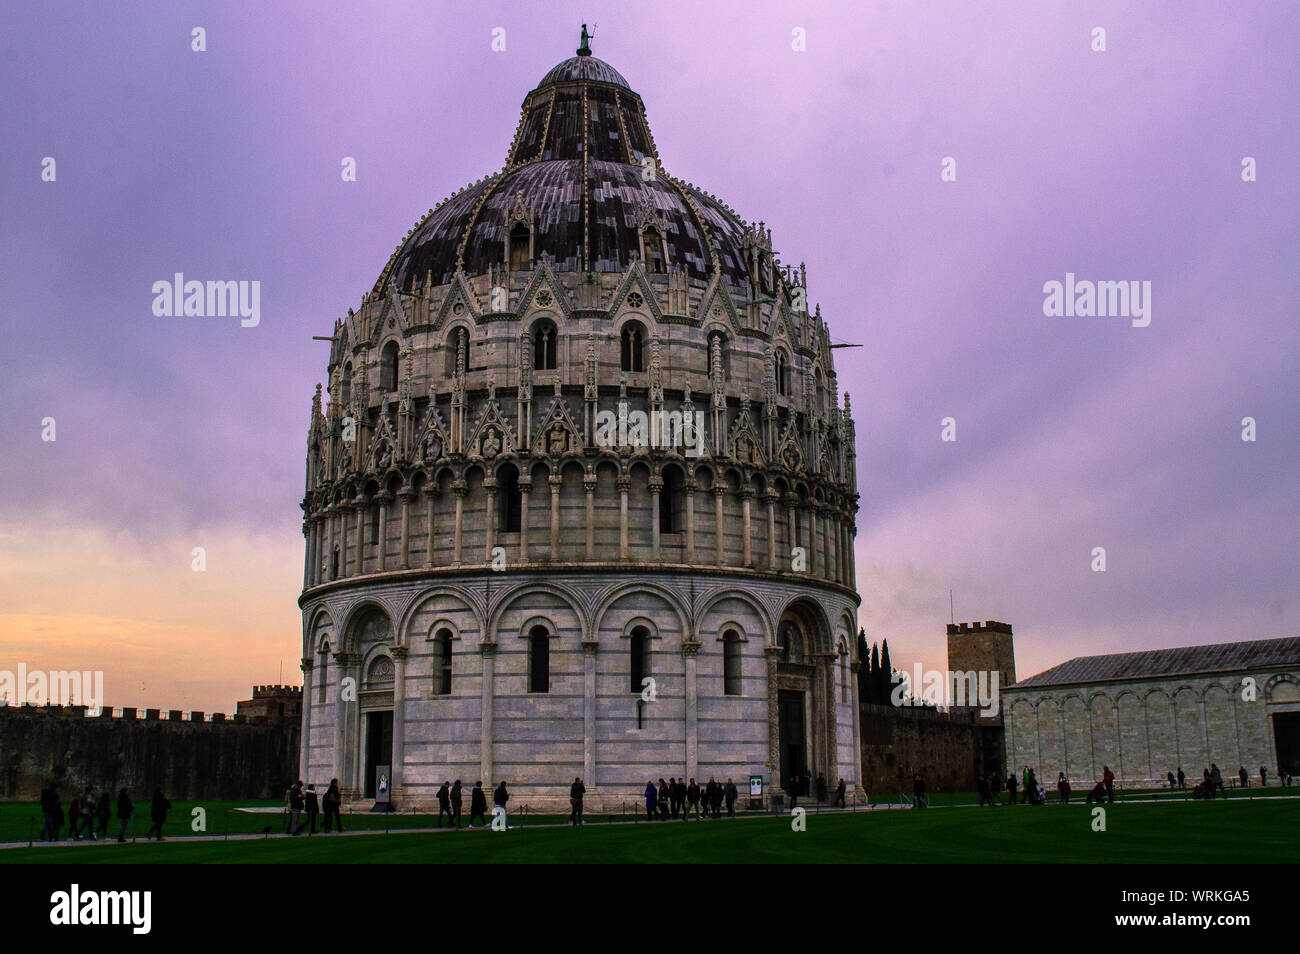 Low Angle View Of Piazza Dei Miracoli Against Cloudy Sky During Dusk Stock Photo